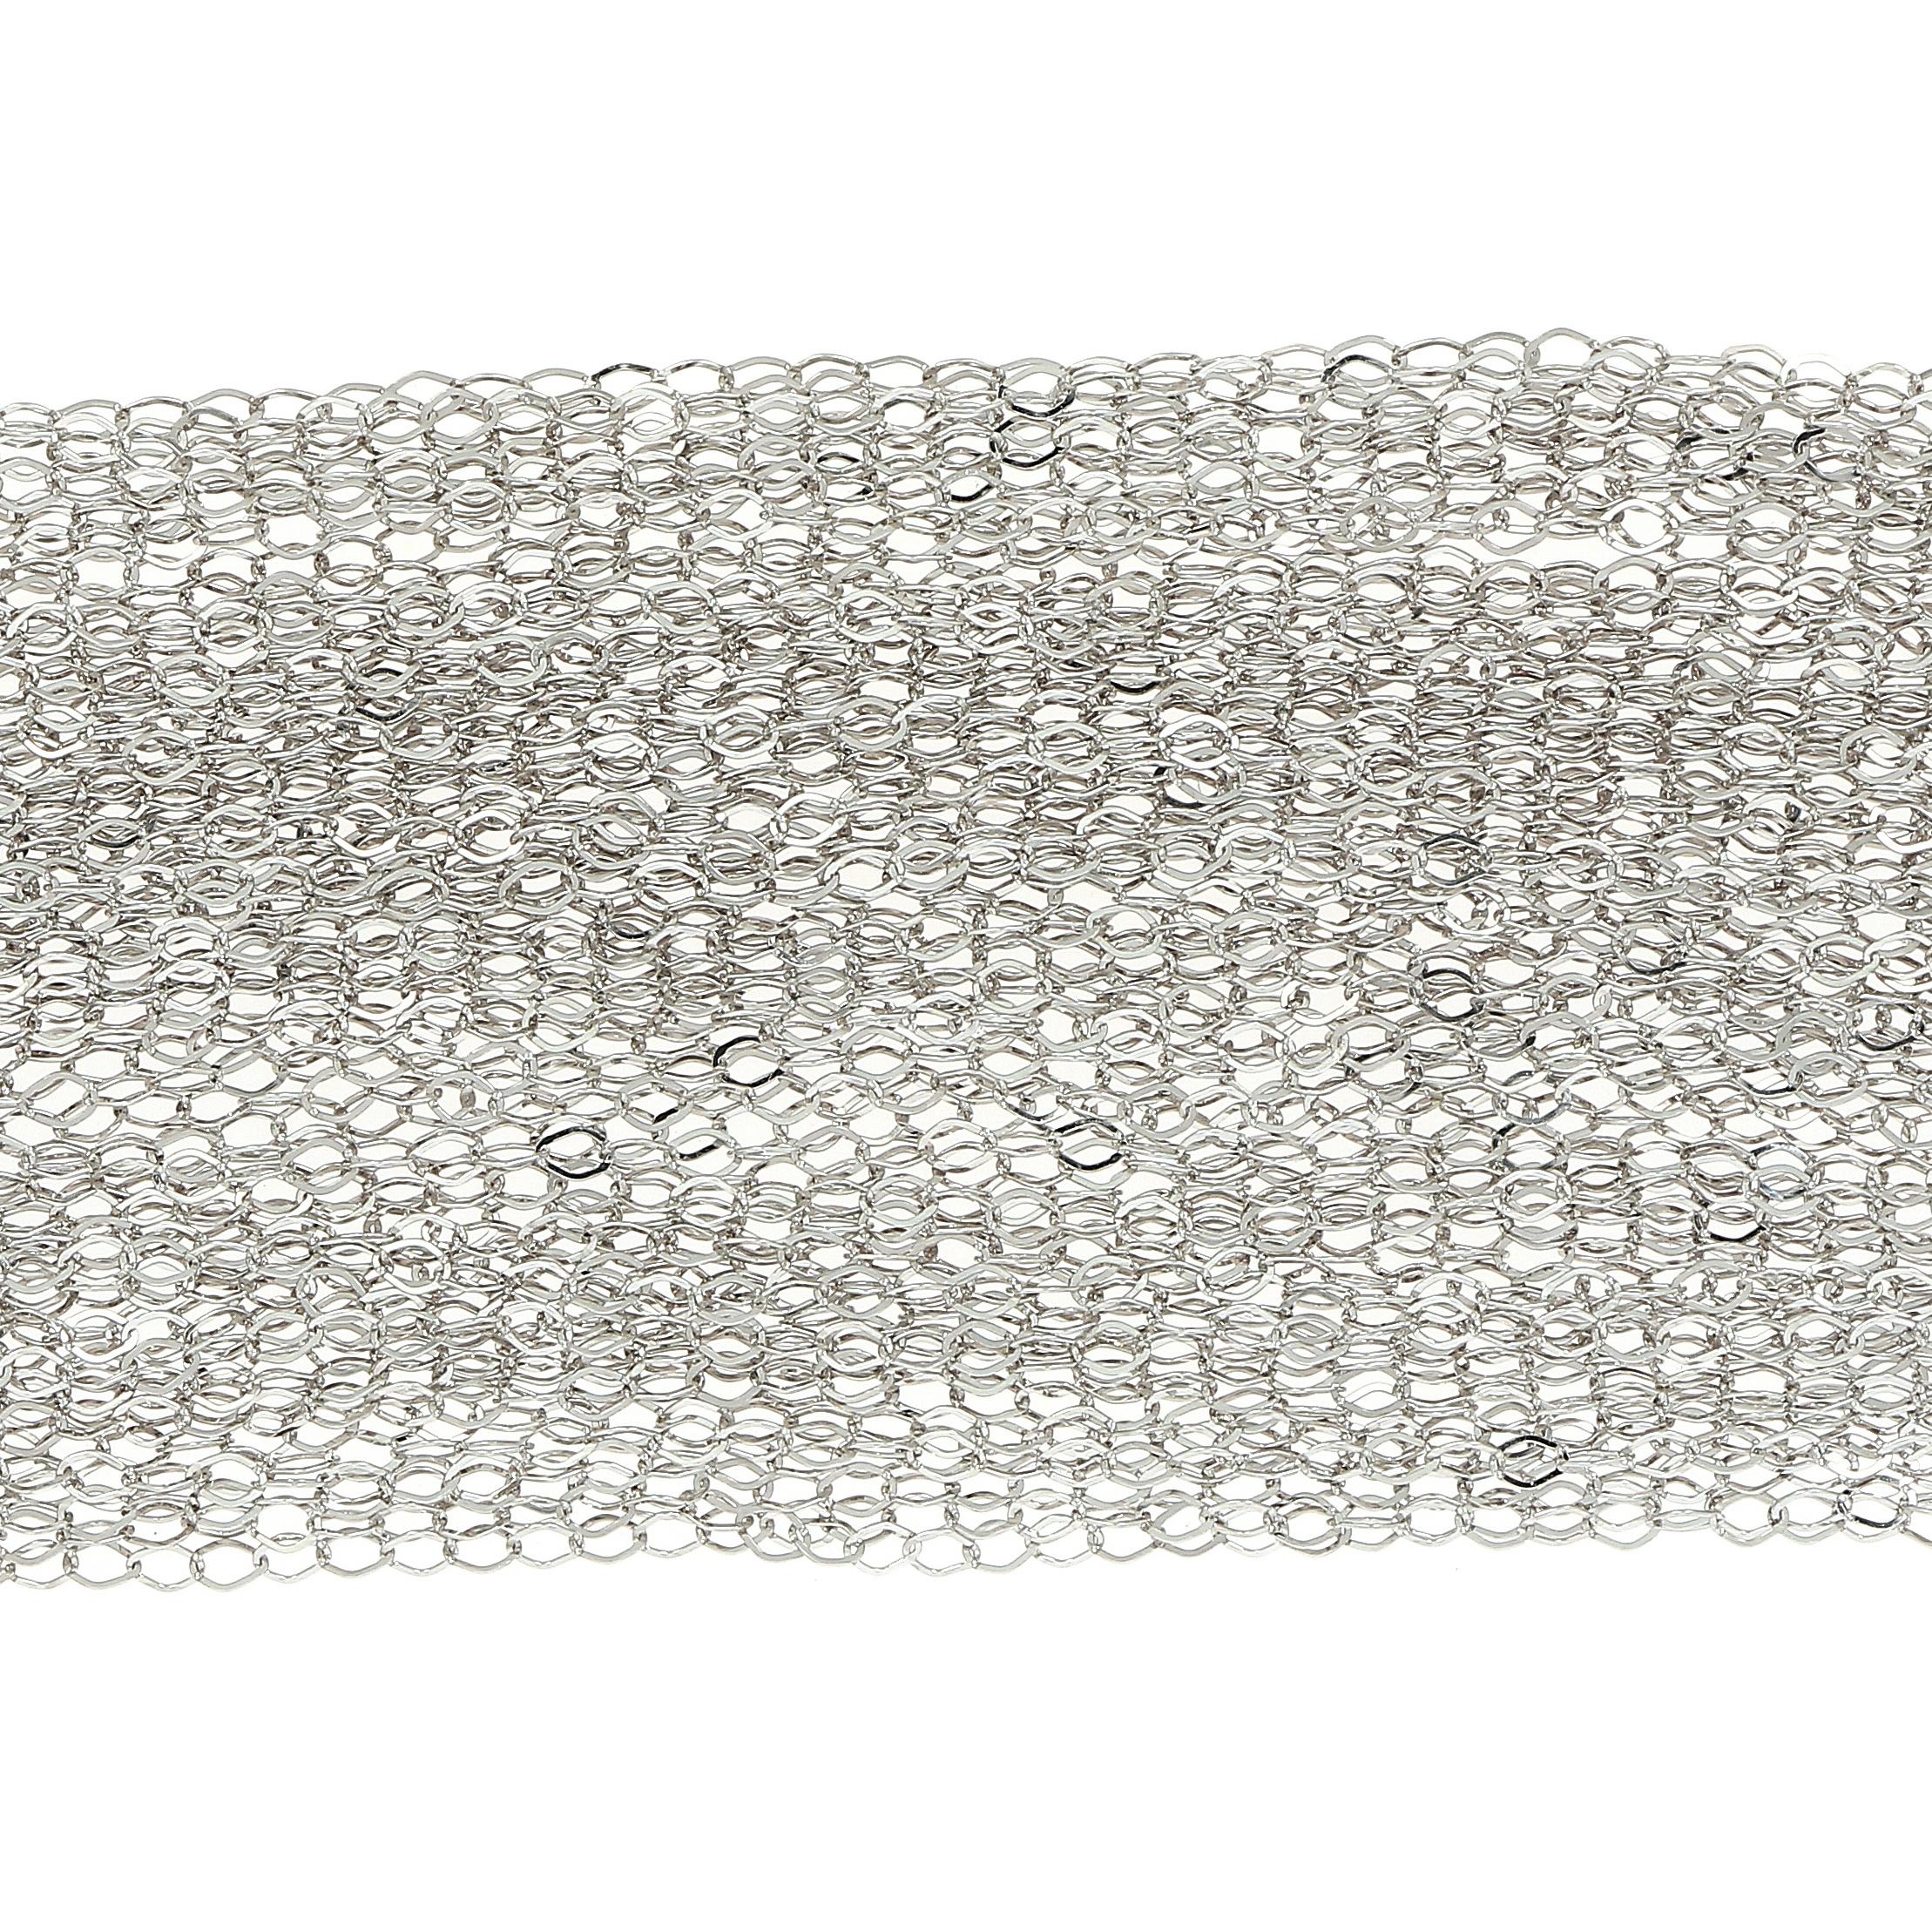 Contemporary Multi-Strand Silver Bracelet with Rectangular Magnetic Claps Italian Manufacture